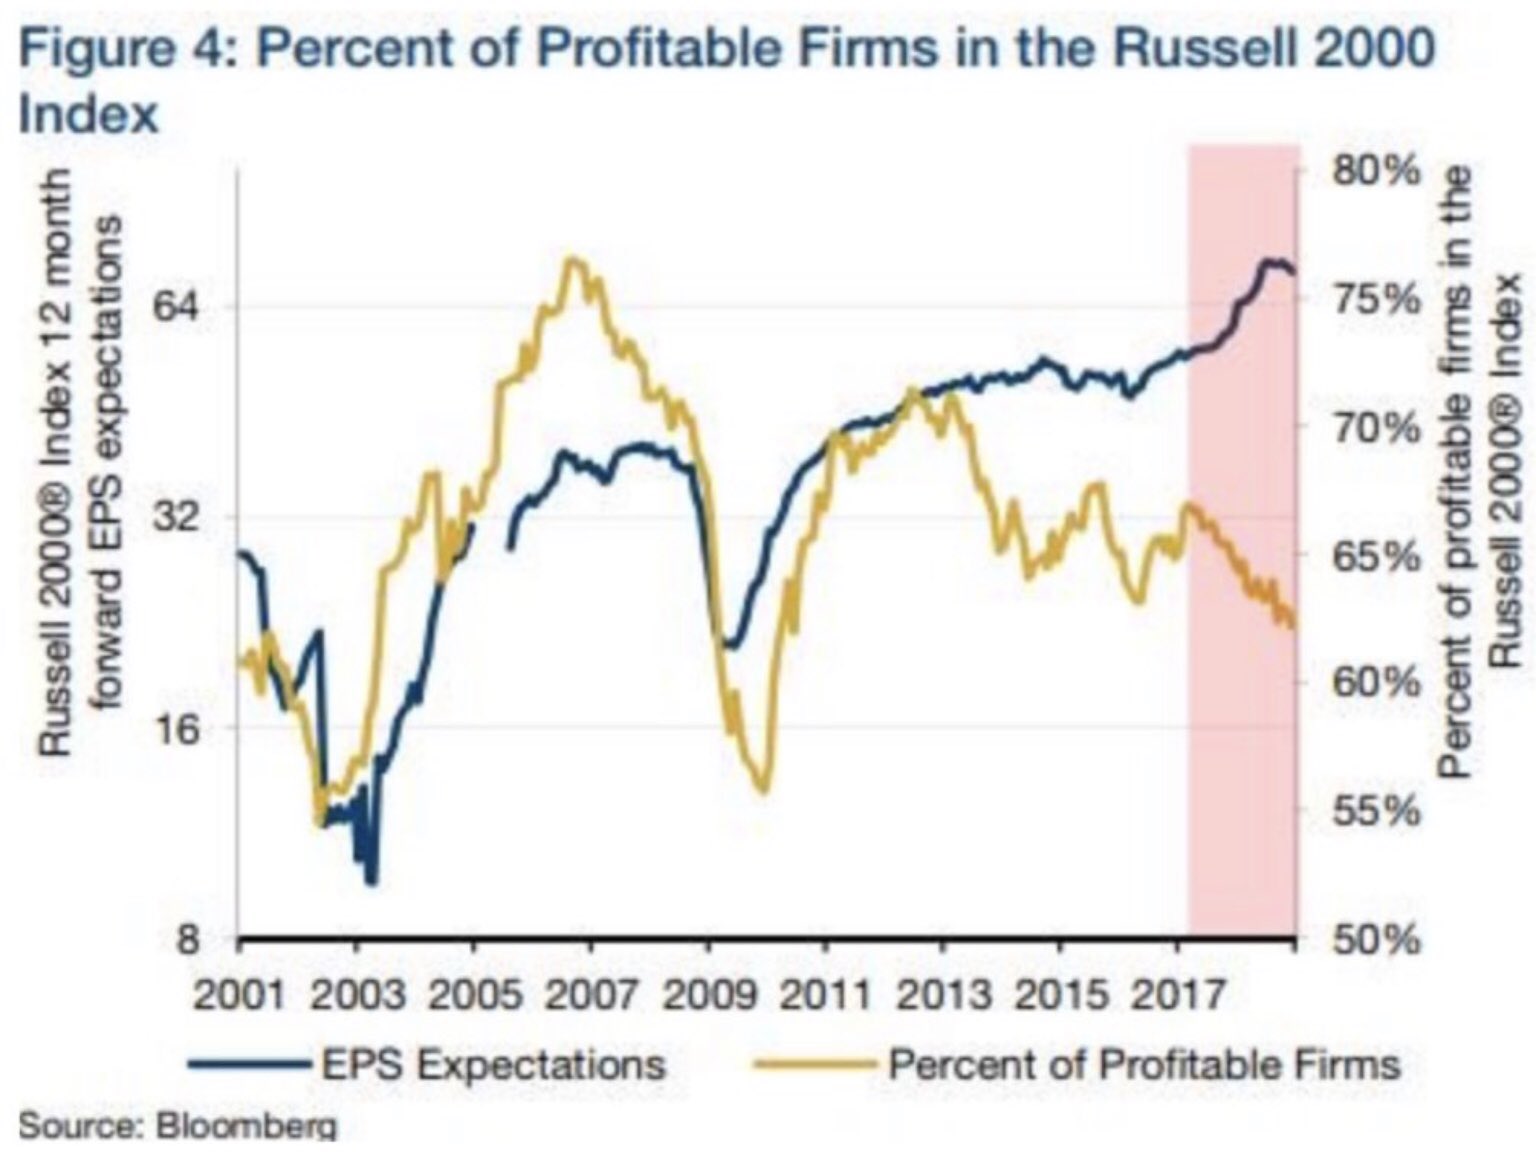 Big expectations gap vs reality for Russell 2000 companies